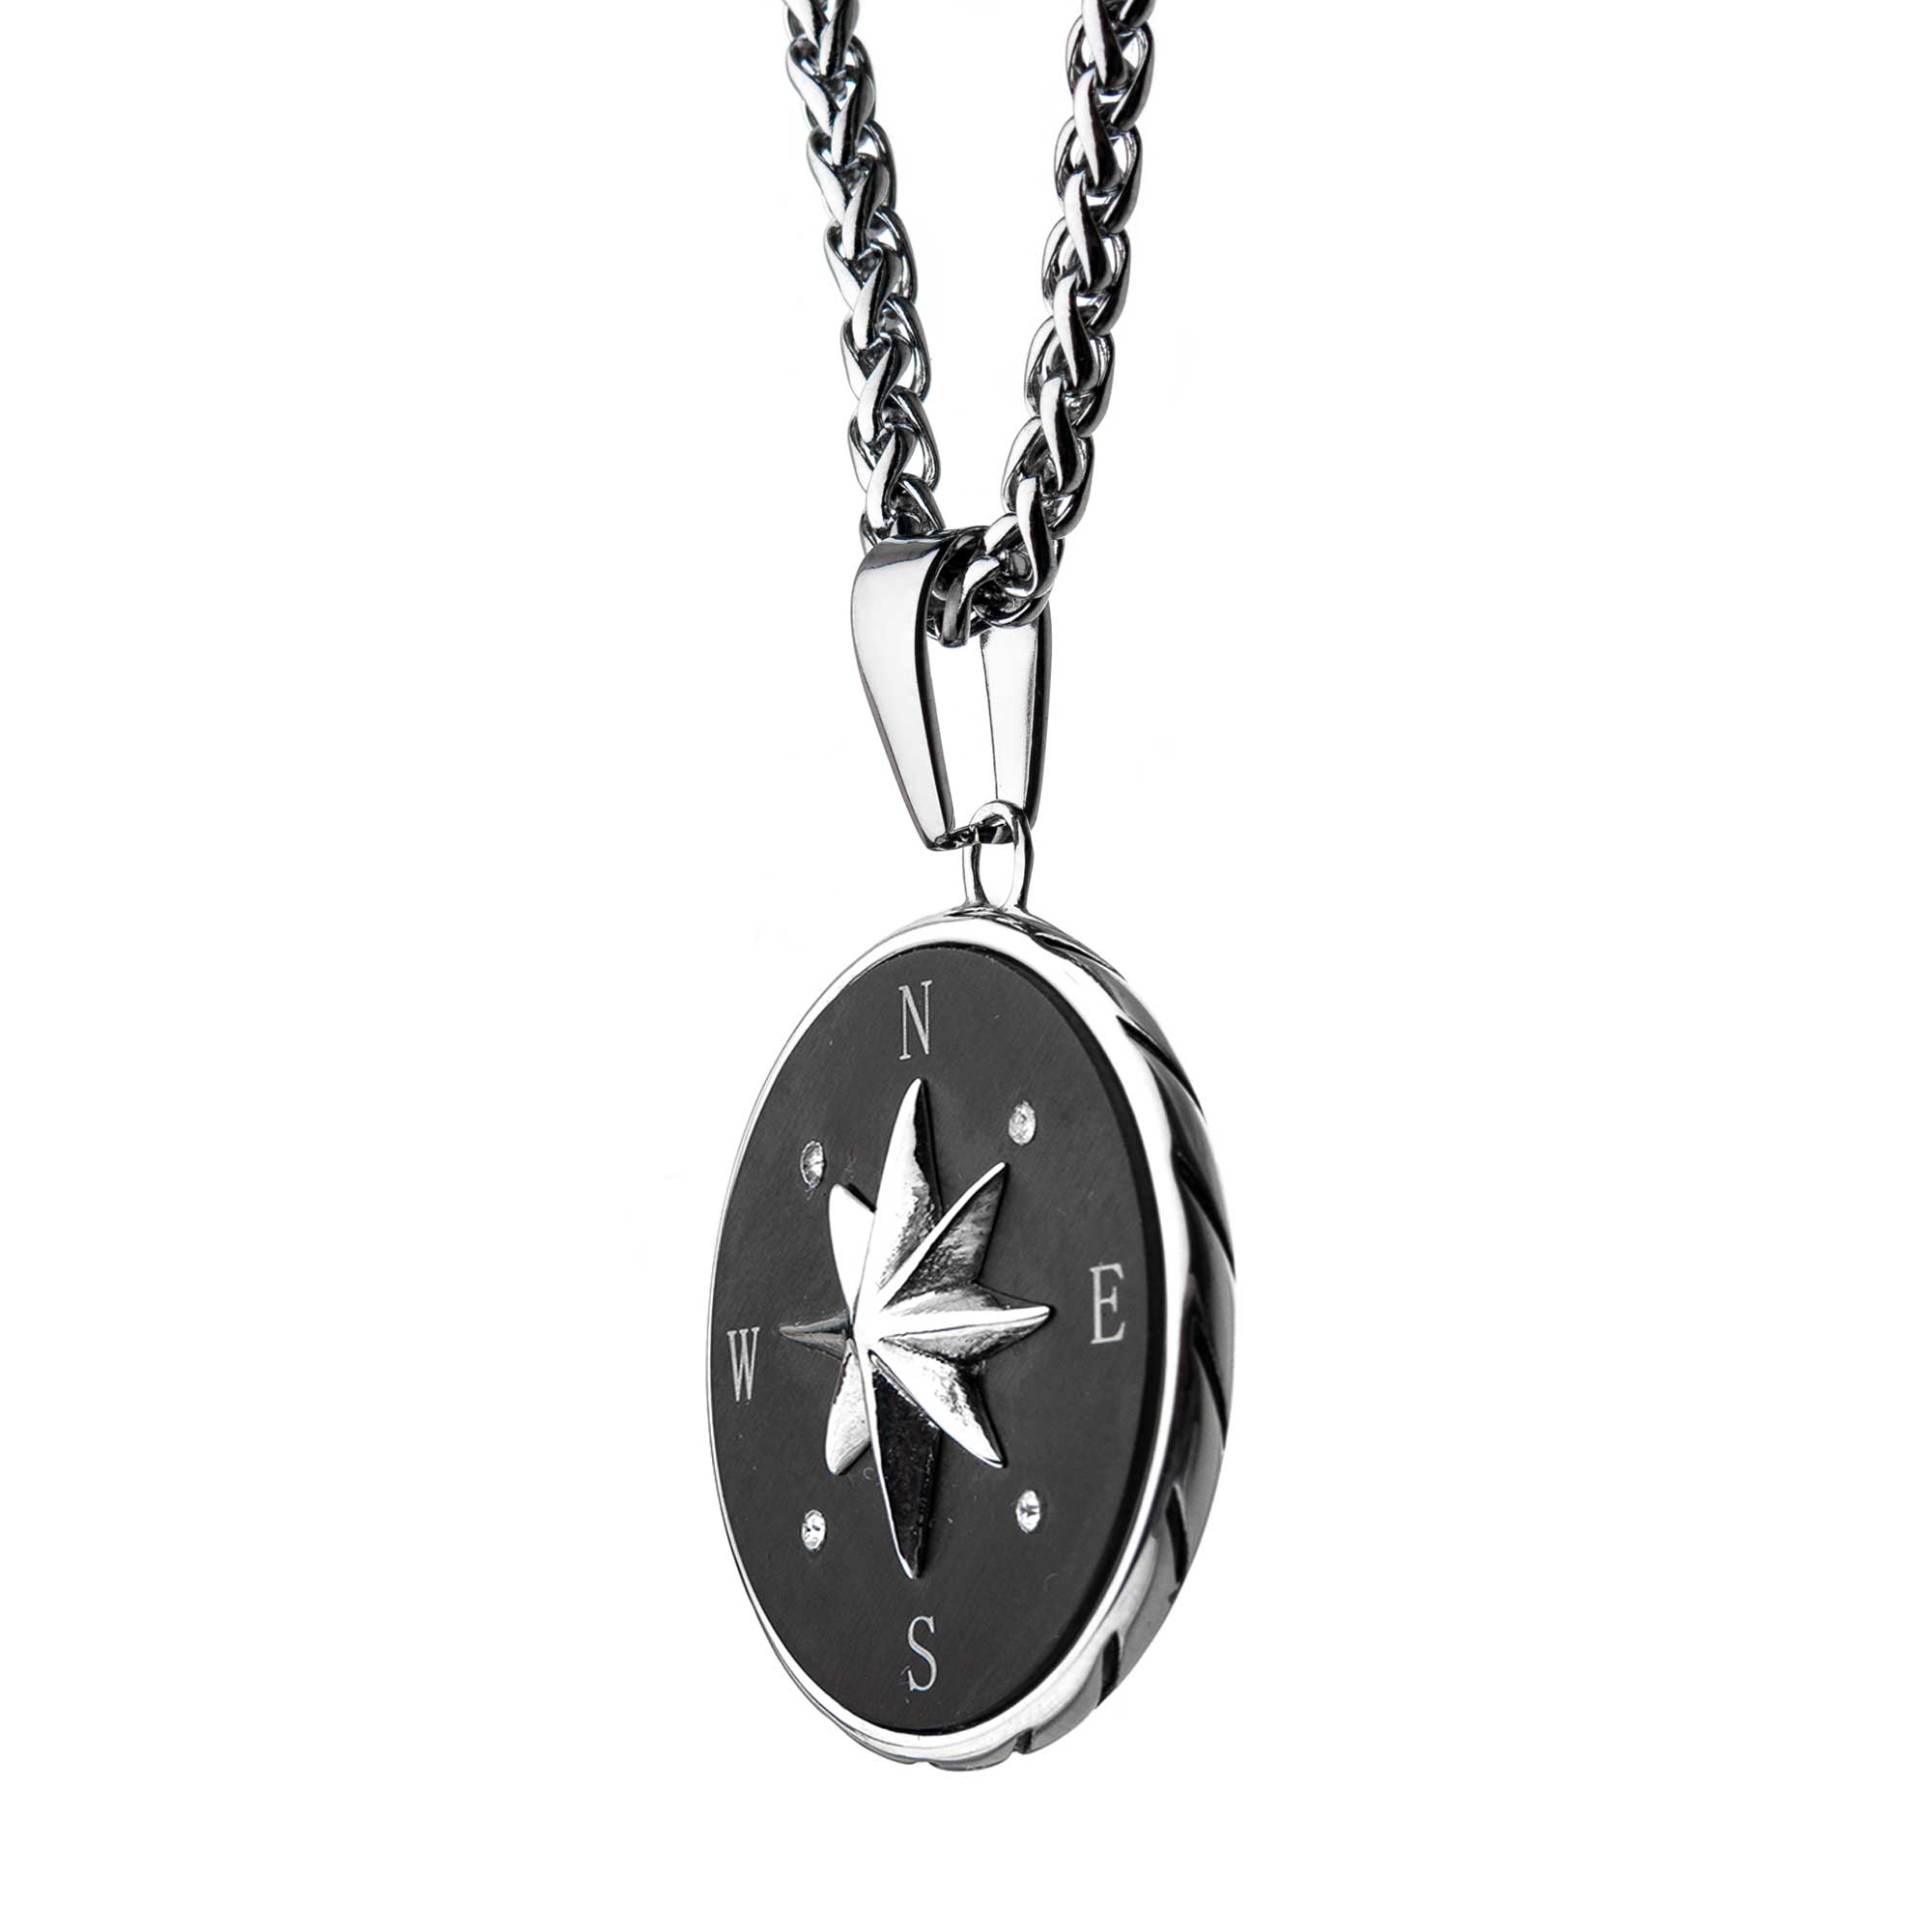 Stainless Steel and Black Plated Compass Pendant with Chain Image 3 Ken Walker Jewelers Gig Harbor, WA